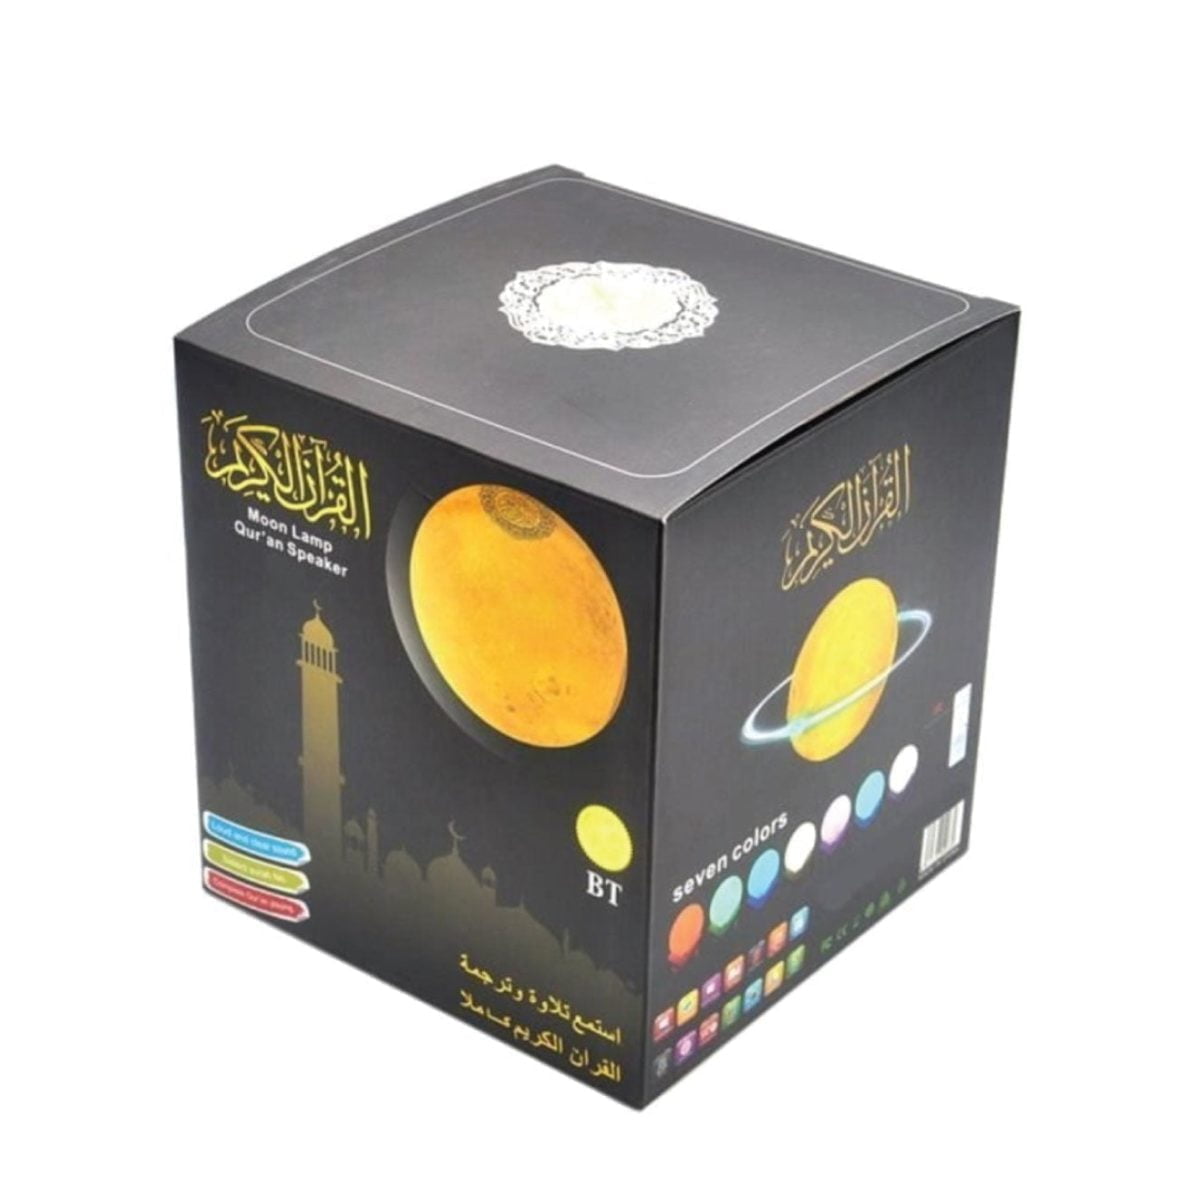 Wwe2 Moon Lamp Qur'An Speaker - Moon Lamp With Quran Recitation - Sq-510With Rechargeable Remote Control, Full Recitations Of Famous Imams And Translation Of The Qur'An Into Many Languages, Including English, Arabic, French, Spanish, German, ... Contains 18 Recitations And 15 Languages Moon Lamp Qur'An Speaker Moon Lamp Qur'An Speaker Sq-510 (18 Reciter, 15 Translation)